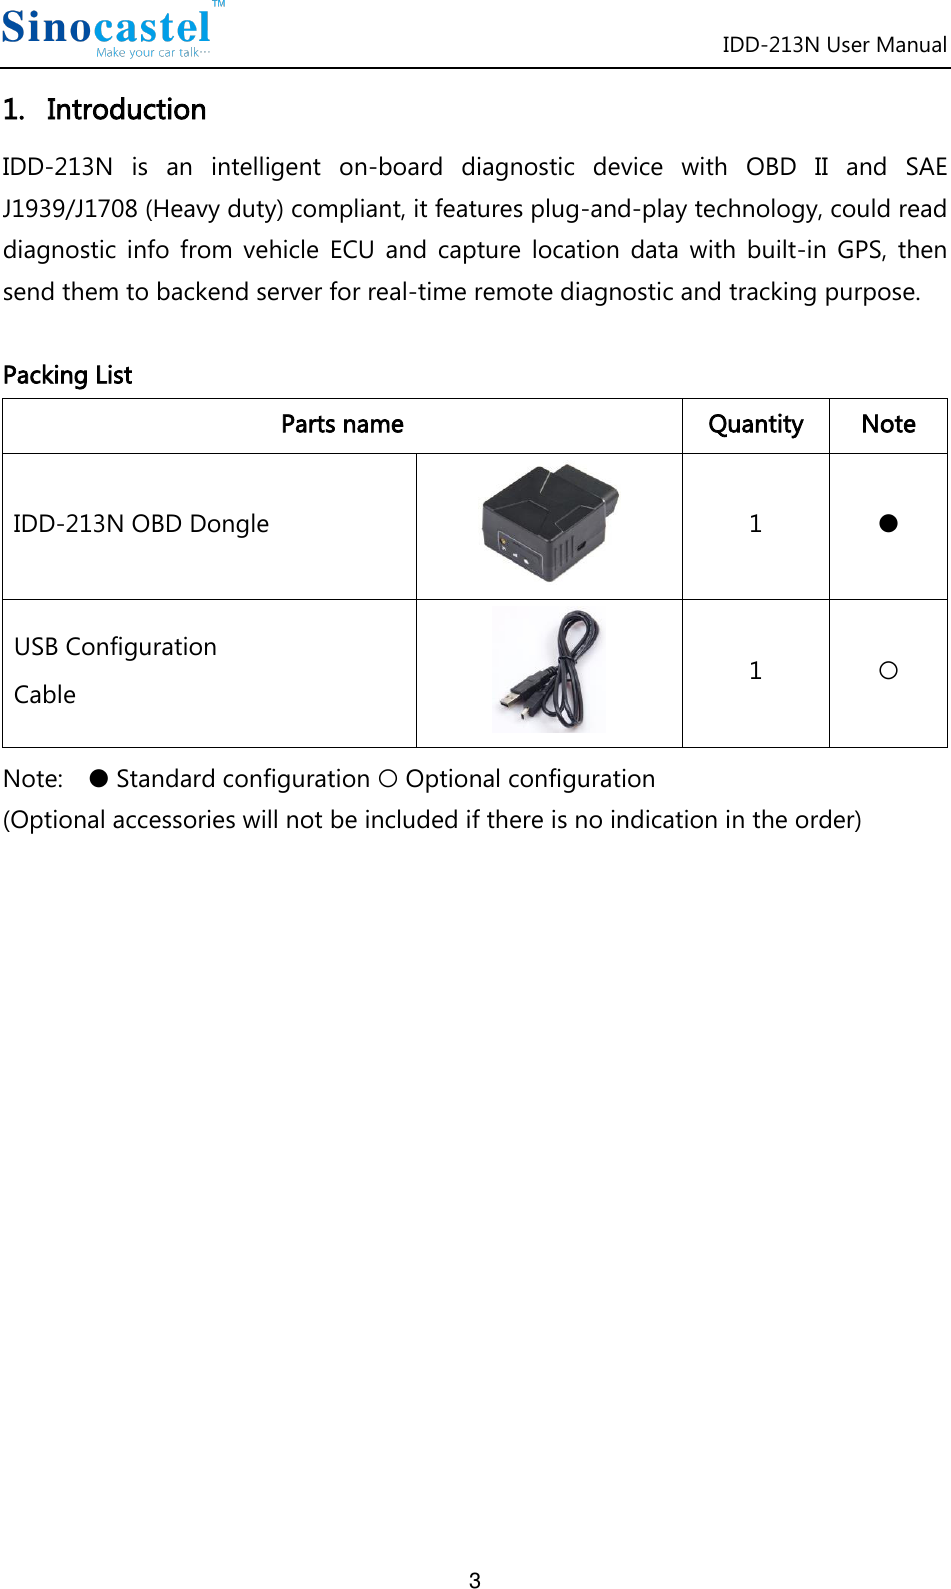 IDD-213N User Manual 3 1.   Introduction IDD-213N  is  an  intelligent  on-board  diagnostic  device  with  OBD  II  and  SAE J1939/J1708 (Heavy duty) compliant, it features plug-and-play technology, could read diagnostic  info  from  vehicle  ECU  and  capture  location  data  with  built-in  GPS,  then send them to backend server for real-time remote diagnostic and tracking purpose.  Packing List Parts name Quantity Note IDD-213N OBD Dongle  1 ● USB Configuration Cable    1 ○ Note:    ● Standard configuration ○ Optional configuration (Optional accessories will not be included if there is no indication in the order)                 